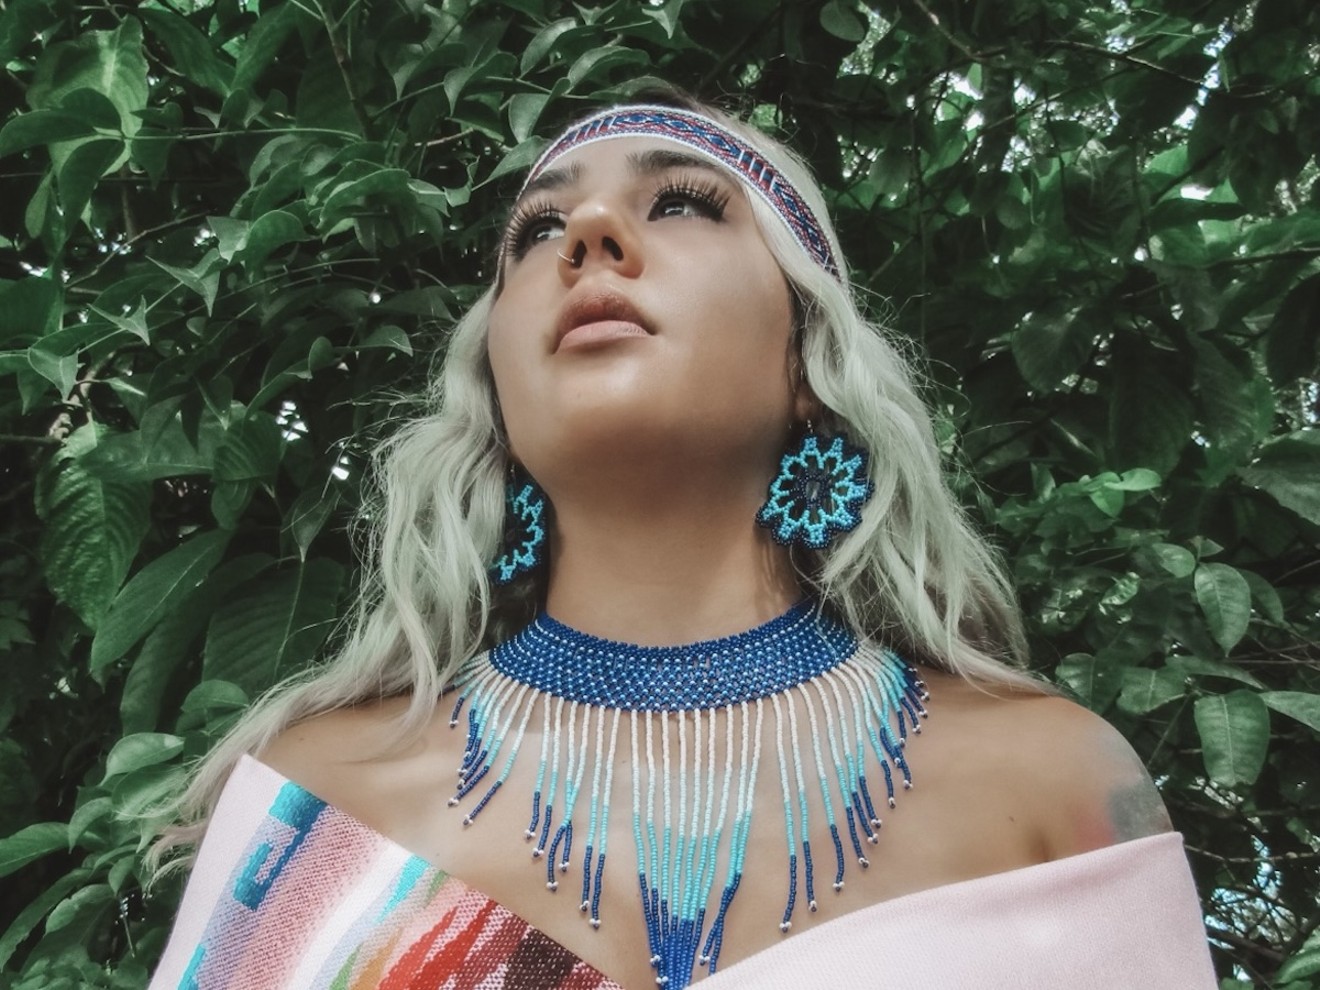 Jewelry designer Kimberly Padilla takes inspiration from her indigenous roots.